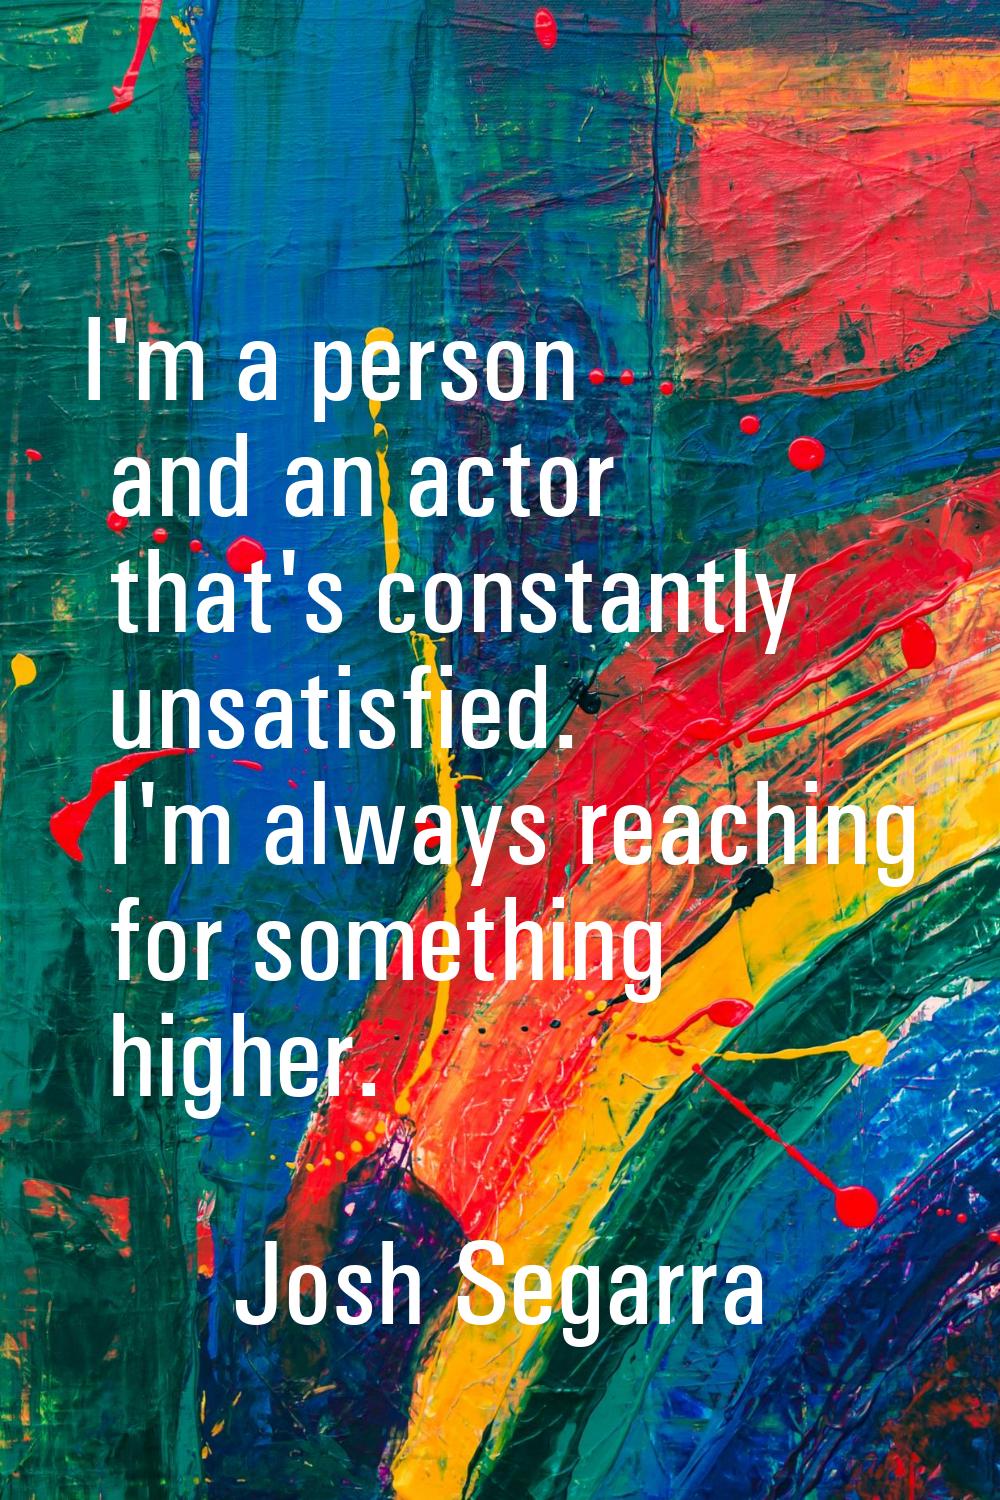 I'm a person and an actor that's constantly unsatisfied. I'm always reaching for something higher.